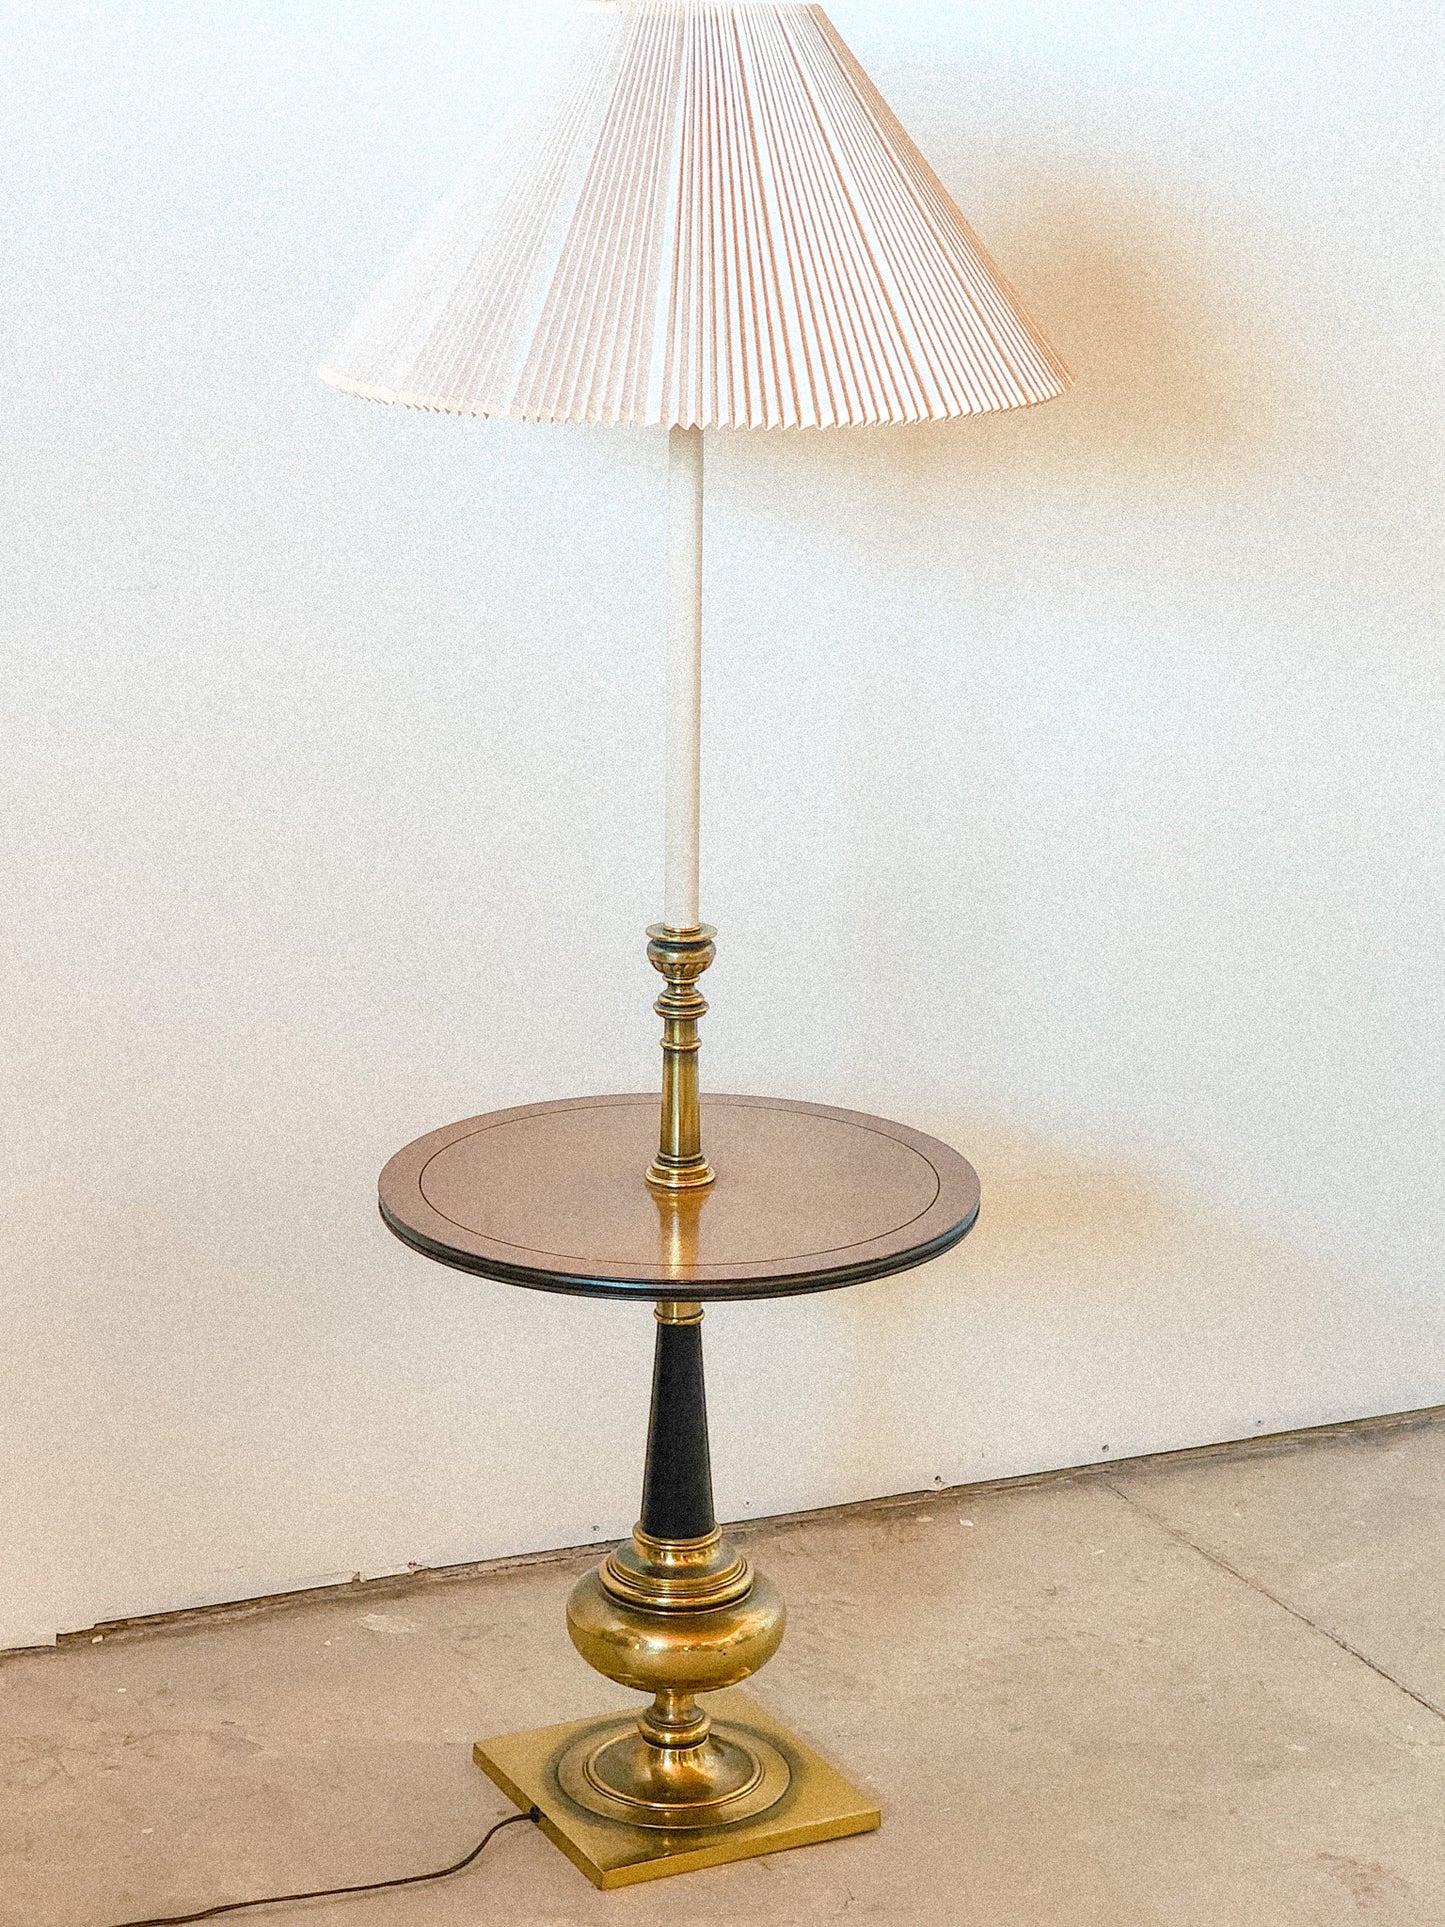 Vintage Brass & Wooden Table Lamp